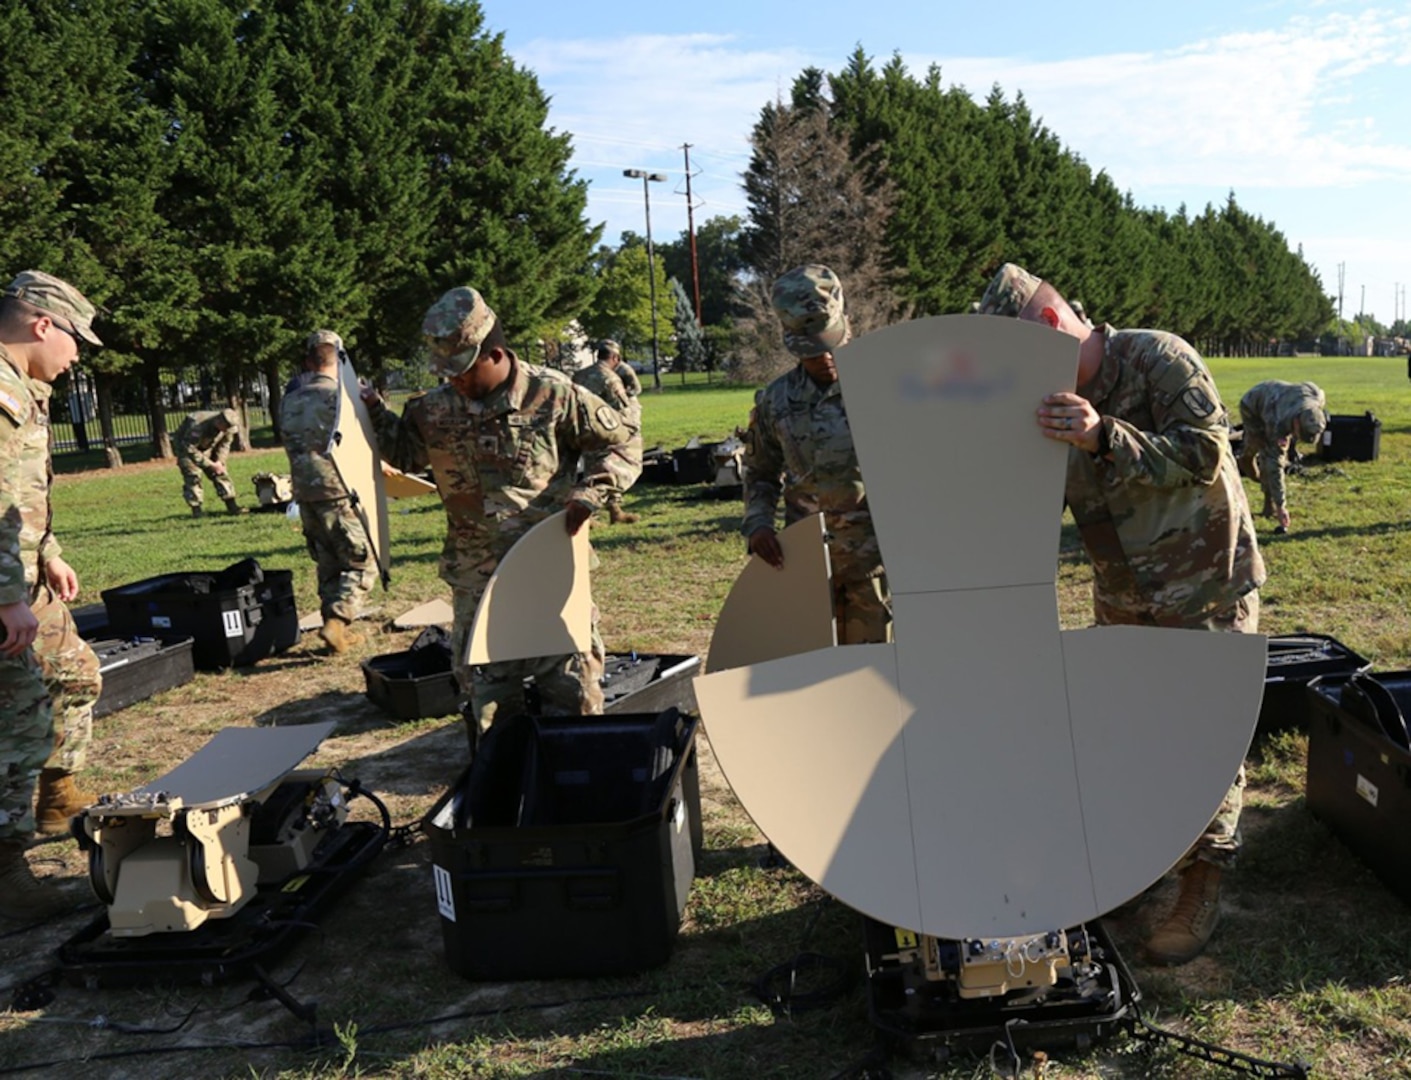 Soldiers from the Delaware Army National Guard 198th Expeditionary Signal Battalion-Enhanced (ESB-E) train on the Scalable Network Node, which is part of the unit’s modernized smaller, lighter, faster ESB-E equipment set, in New Castle Delaware, on August 9, 2022.